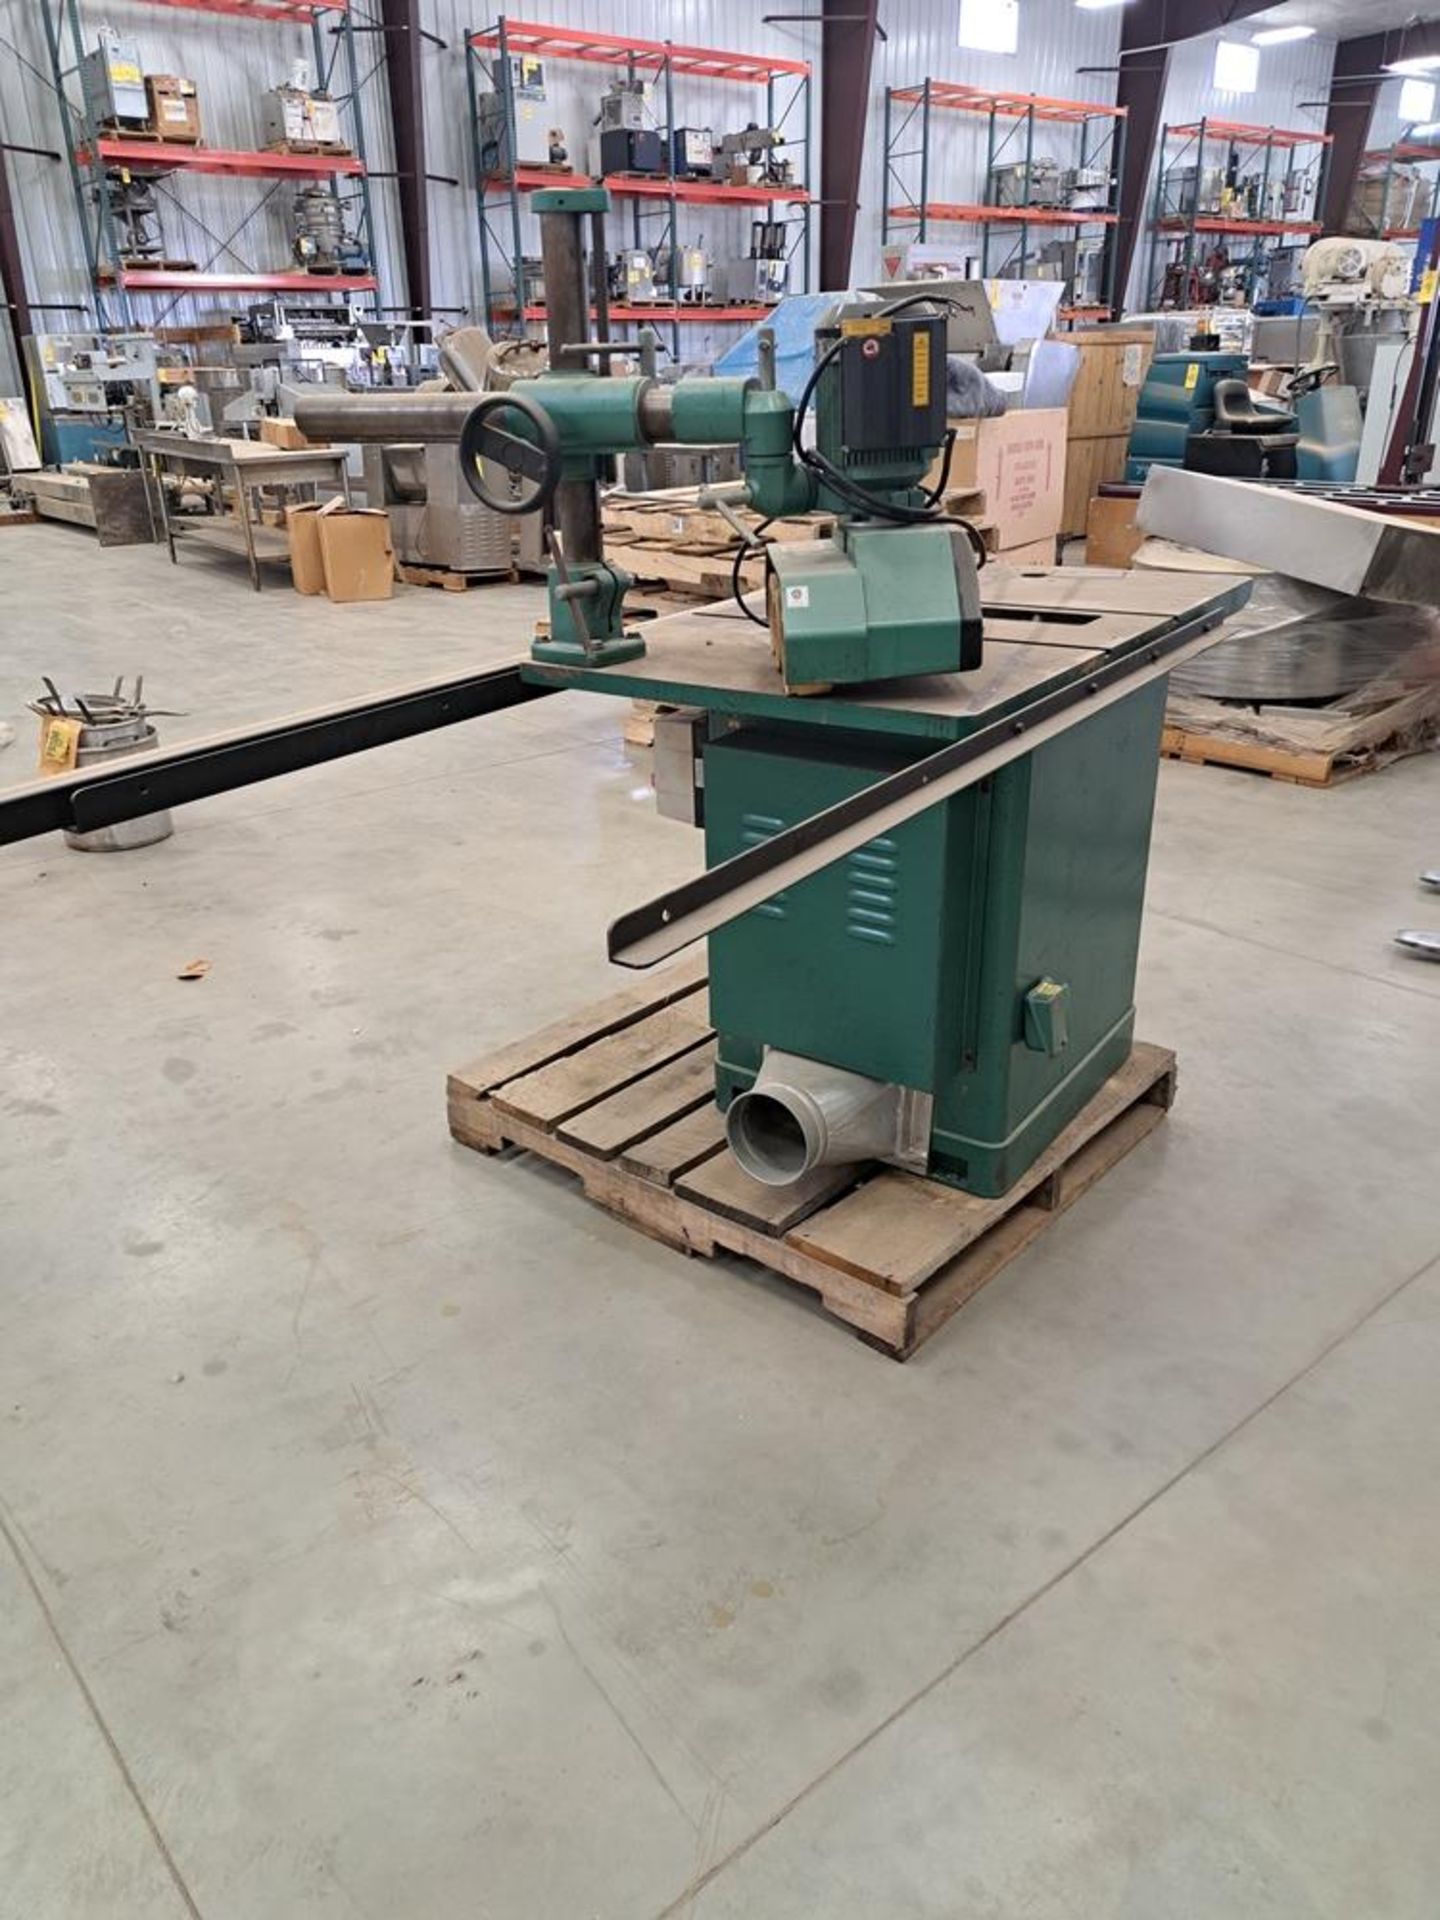 Grizzly Mdl. G9957 12" Table Saw with Grizzly Mdl. G7873 Power Feeder, 1 h.p., 220 volts, 3 phase ( - Image 3 of 6